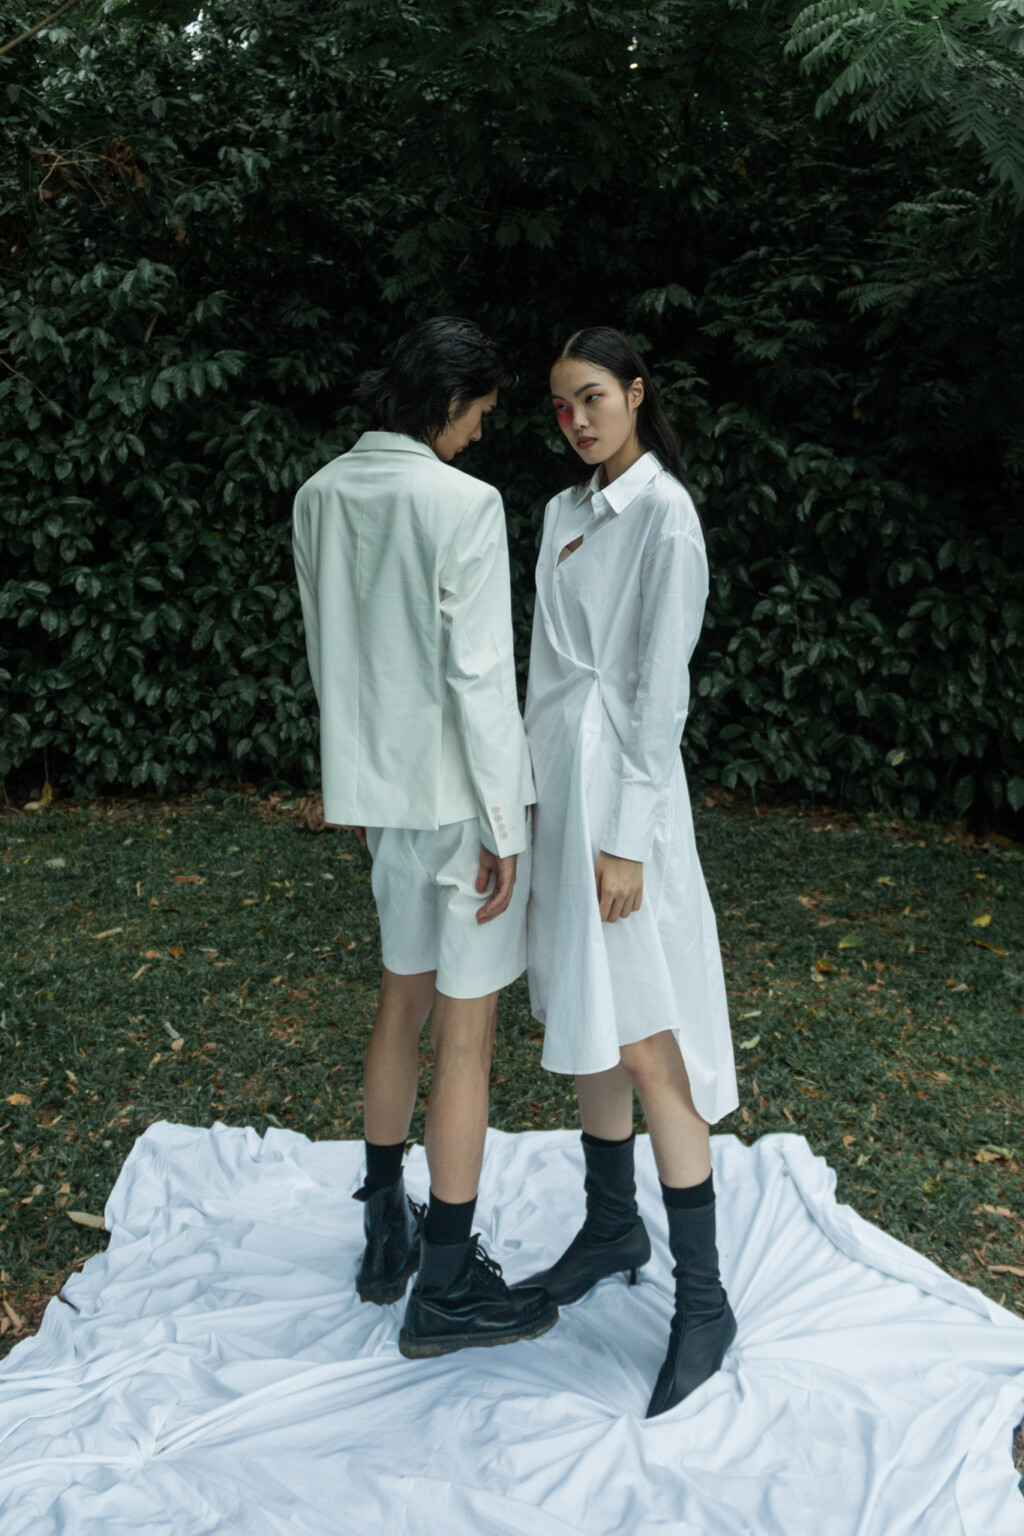 Flowing Genders by Yvette Lim for Flanelle Magazine | Flanelle Magazine